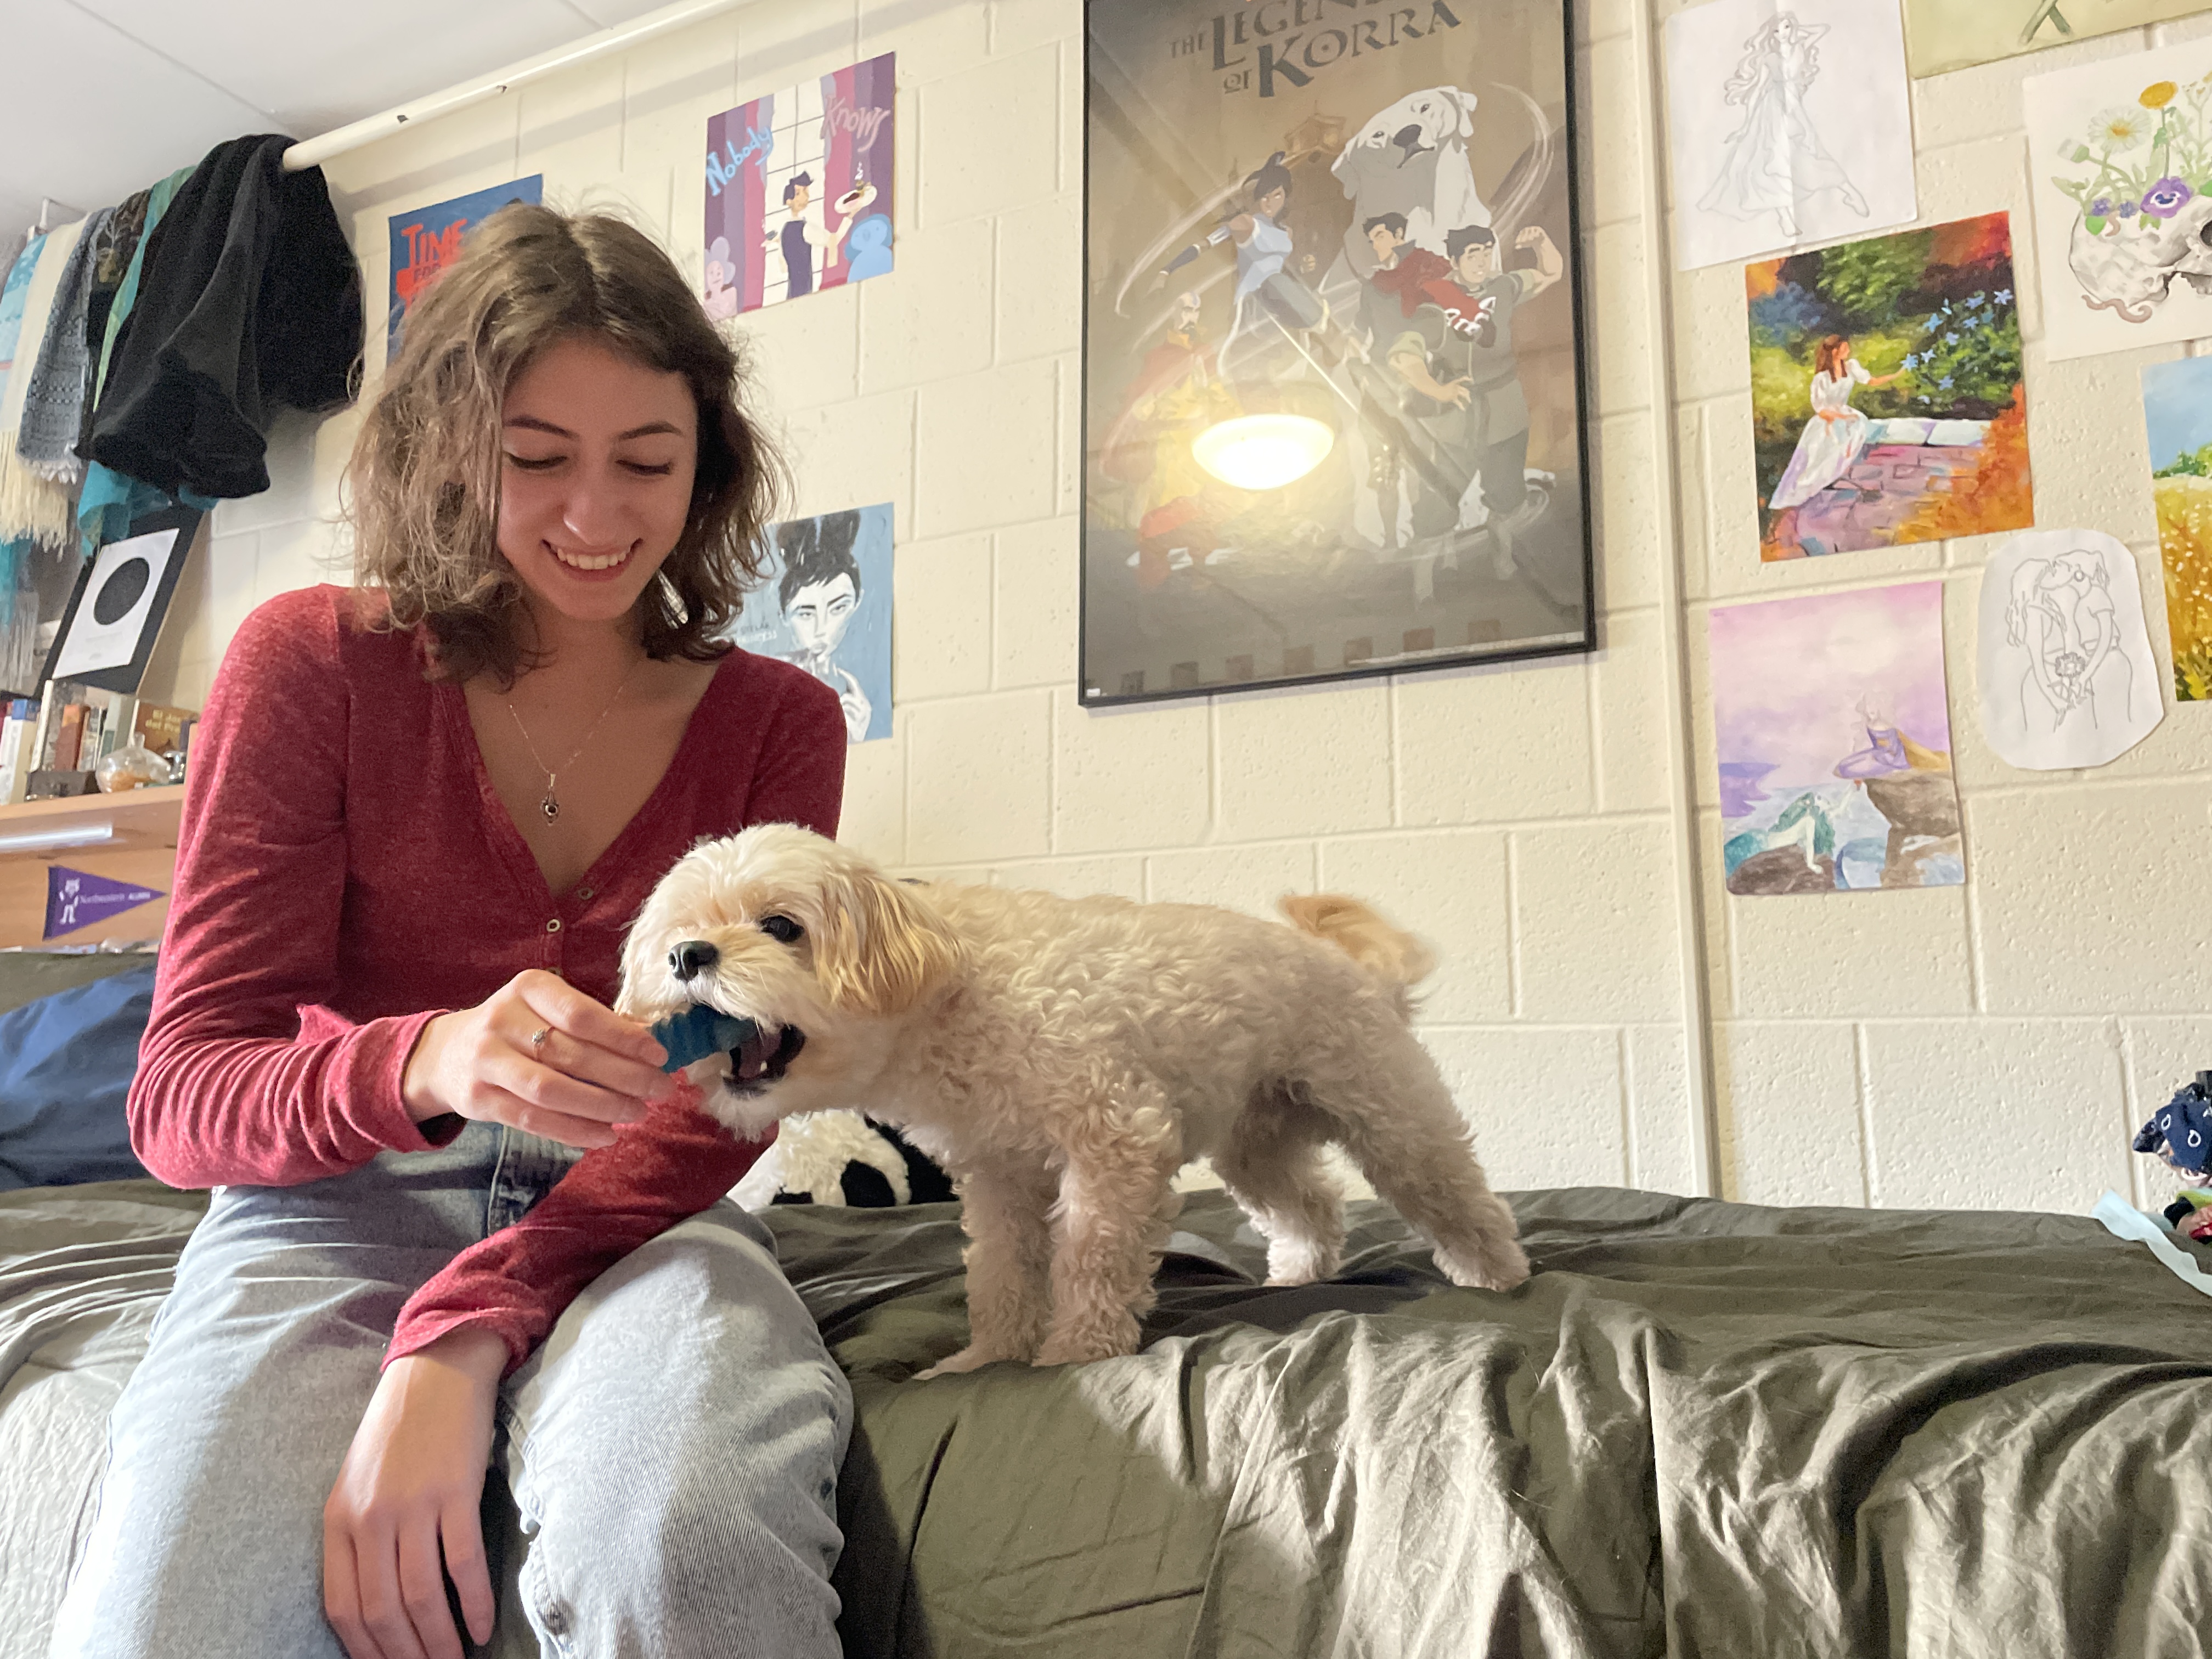 Hero and Mikolic-Berrios sit on her dorm bed while Mikolic-Berrios holds a bone-shaped chew toy for Hero to bite.